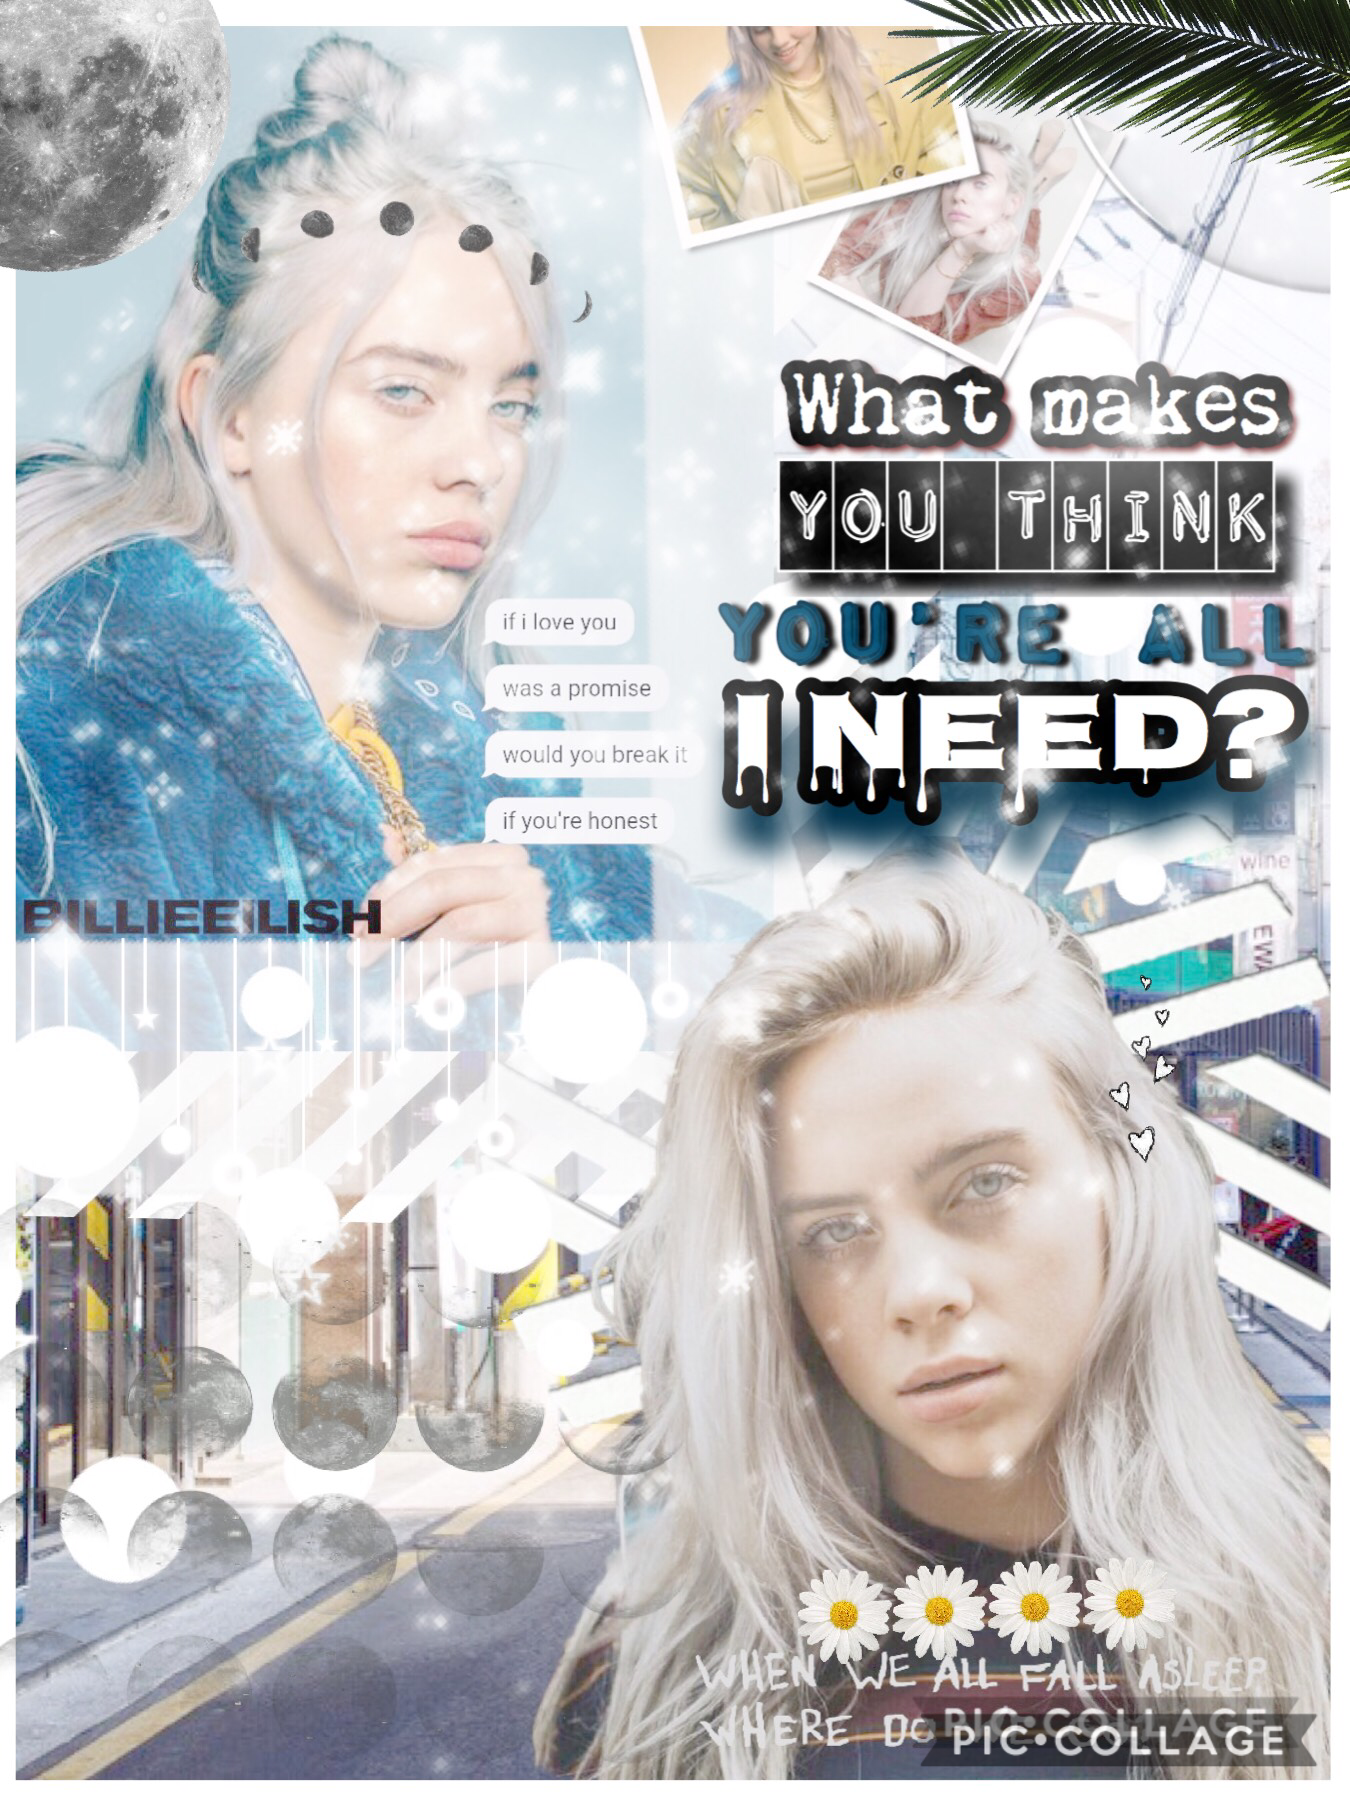 Hey Everyoneee! How are you all? I’m going to try celebrity themed collages for a while, so let me know what you think of this one!! LY’S! 
🖤Billie Eilish🖤